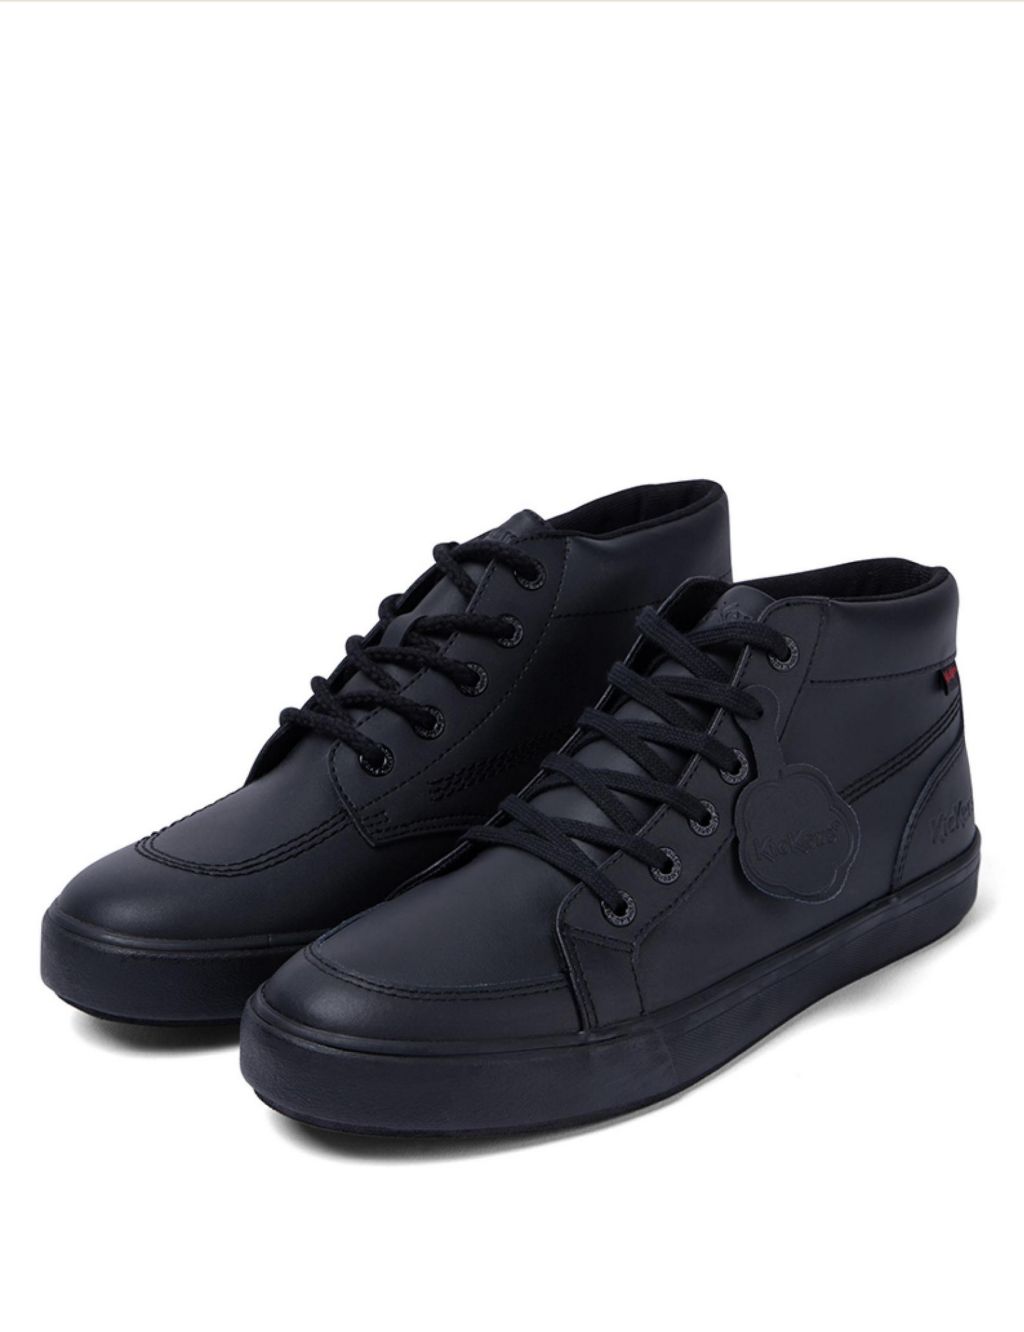 Leather Lace Up High Top Shoes image 2